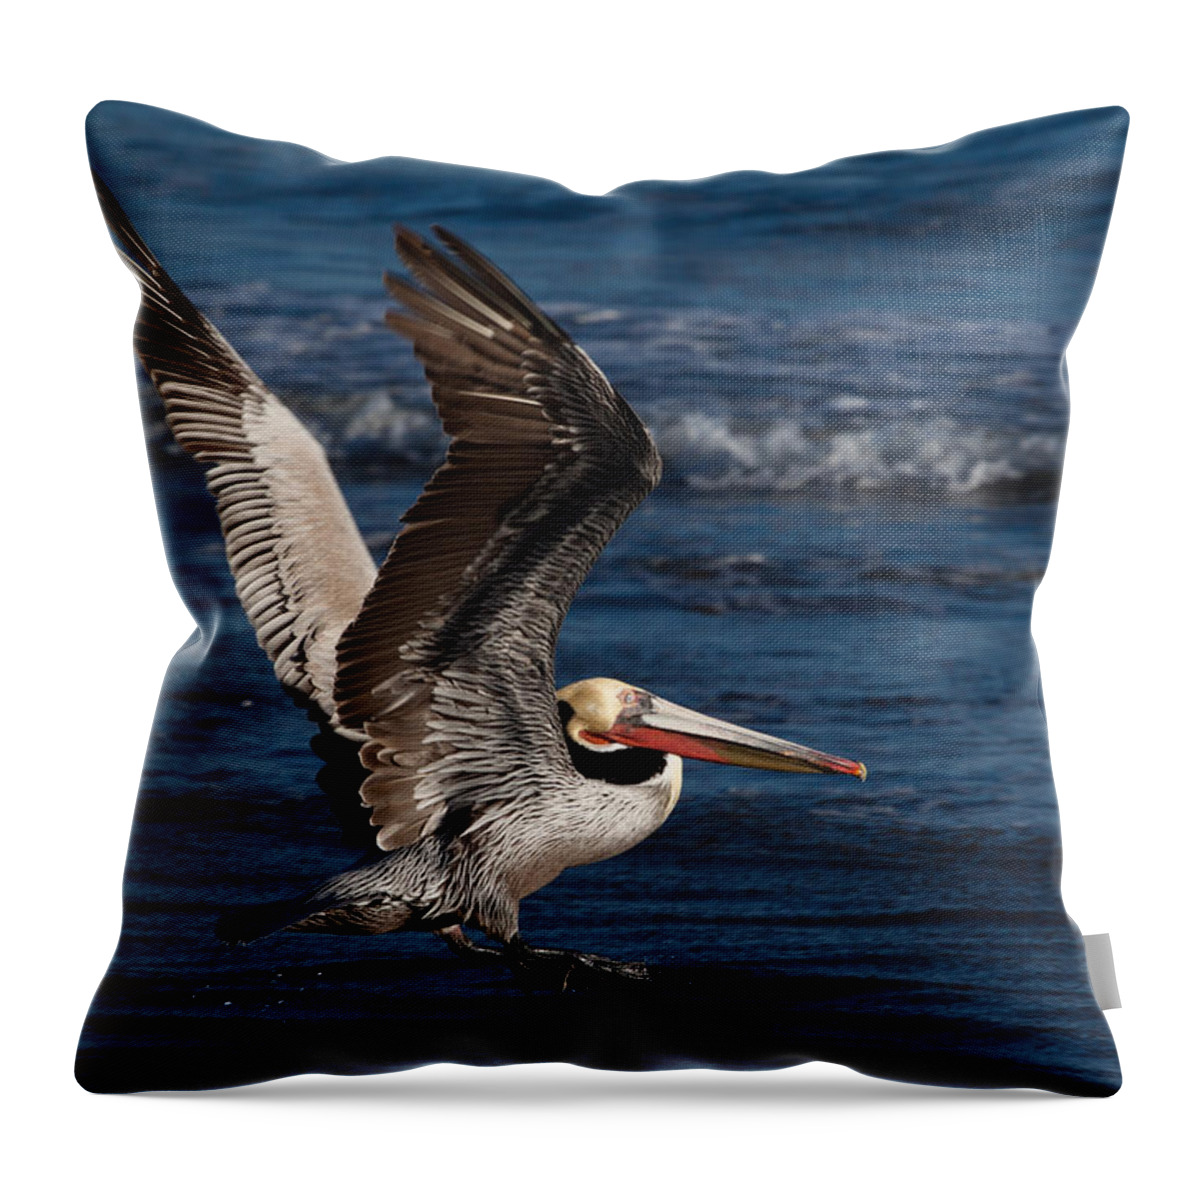 Pelican Throw Pillow featuring the photograph Full Flap Takeoff by John Daly